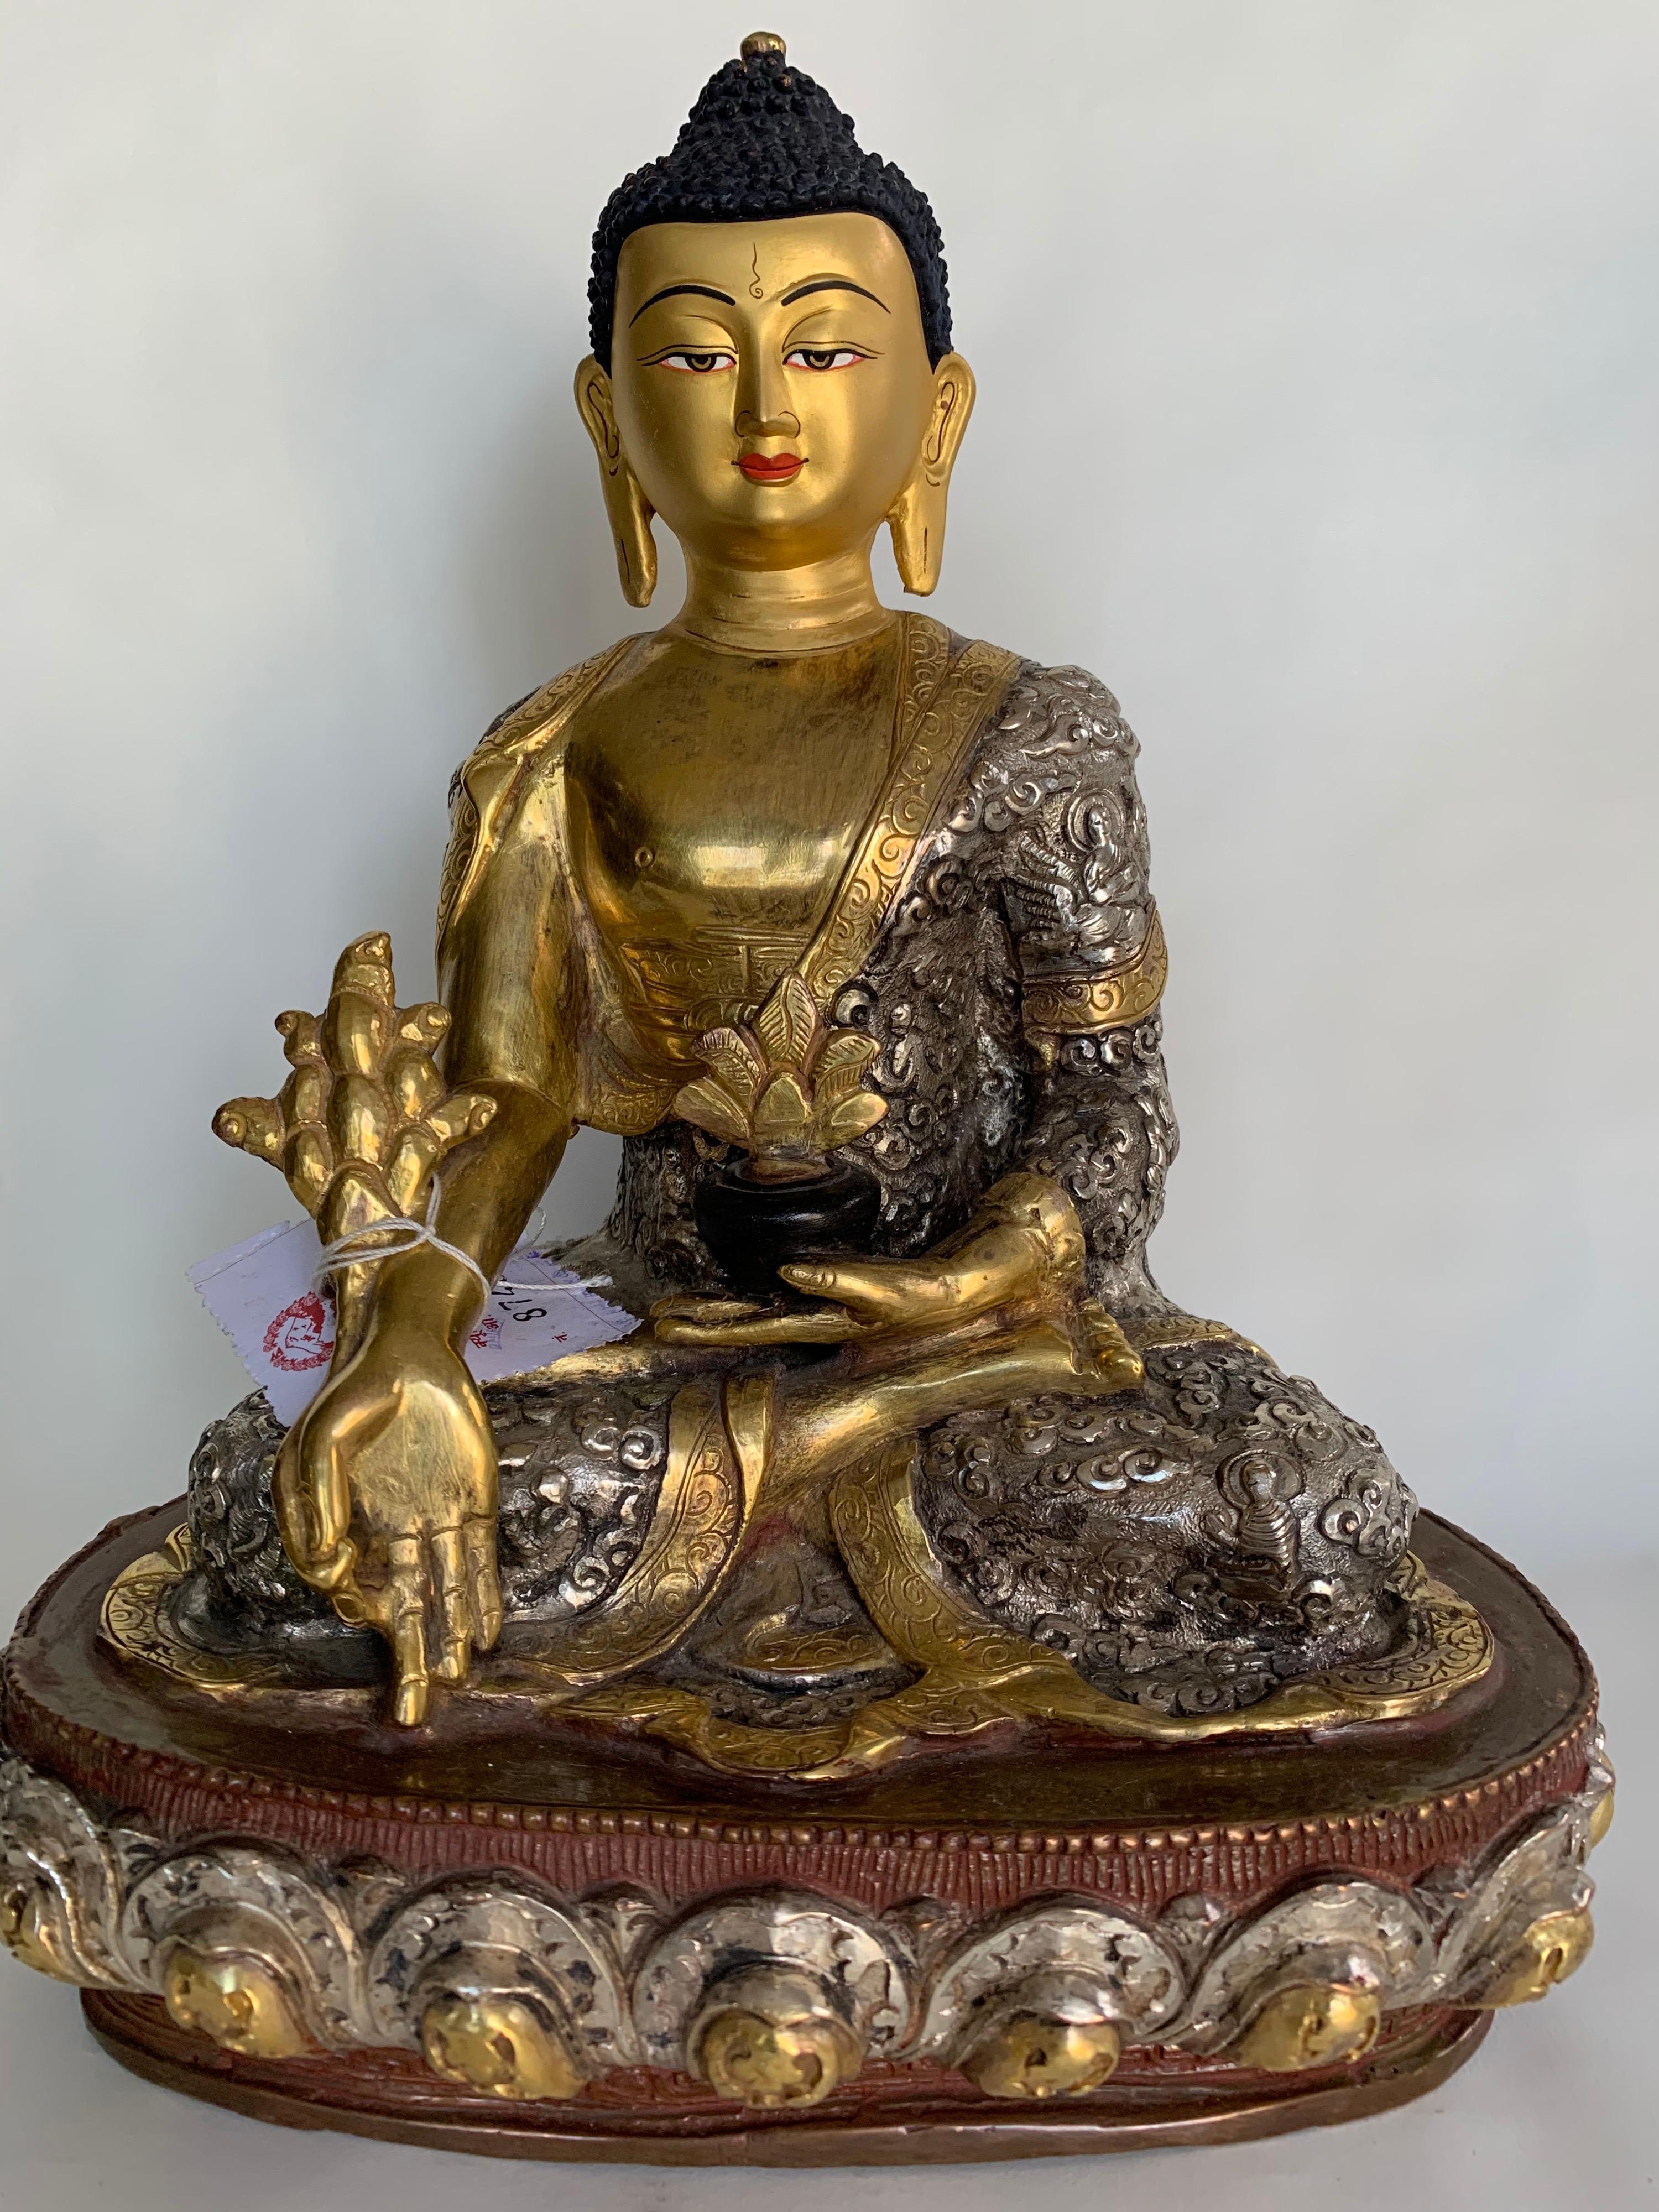 Medicine Buddha Statue 9.5 Inch with 24 Gold Handcrafted by Lost Wax Process - Sculpture by Unknown